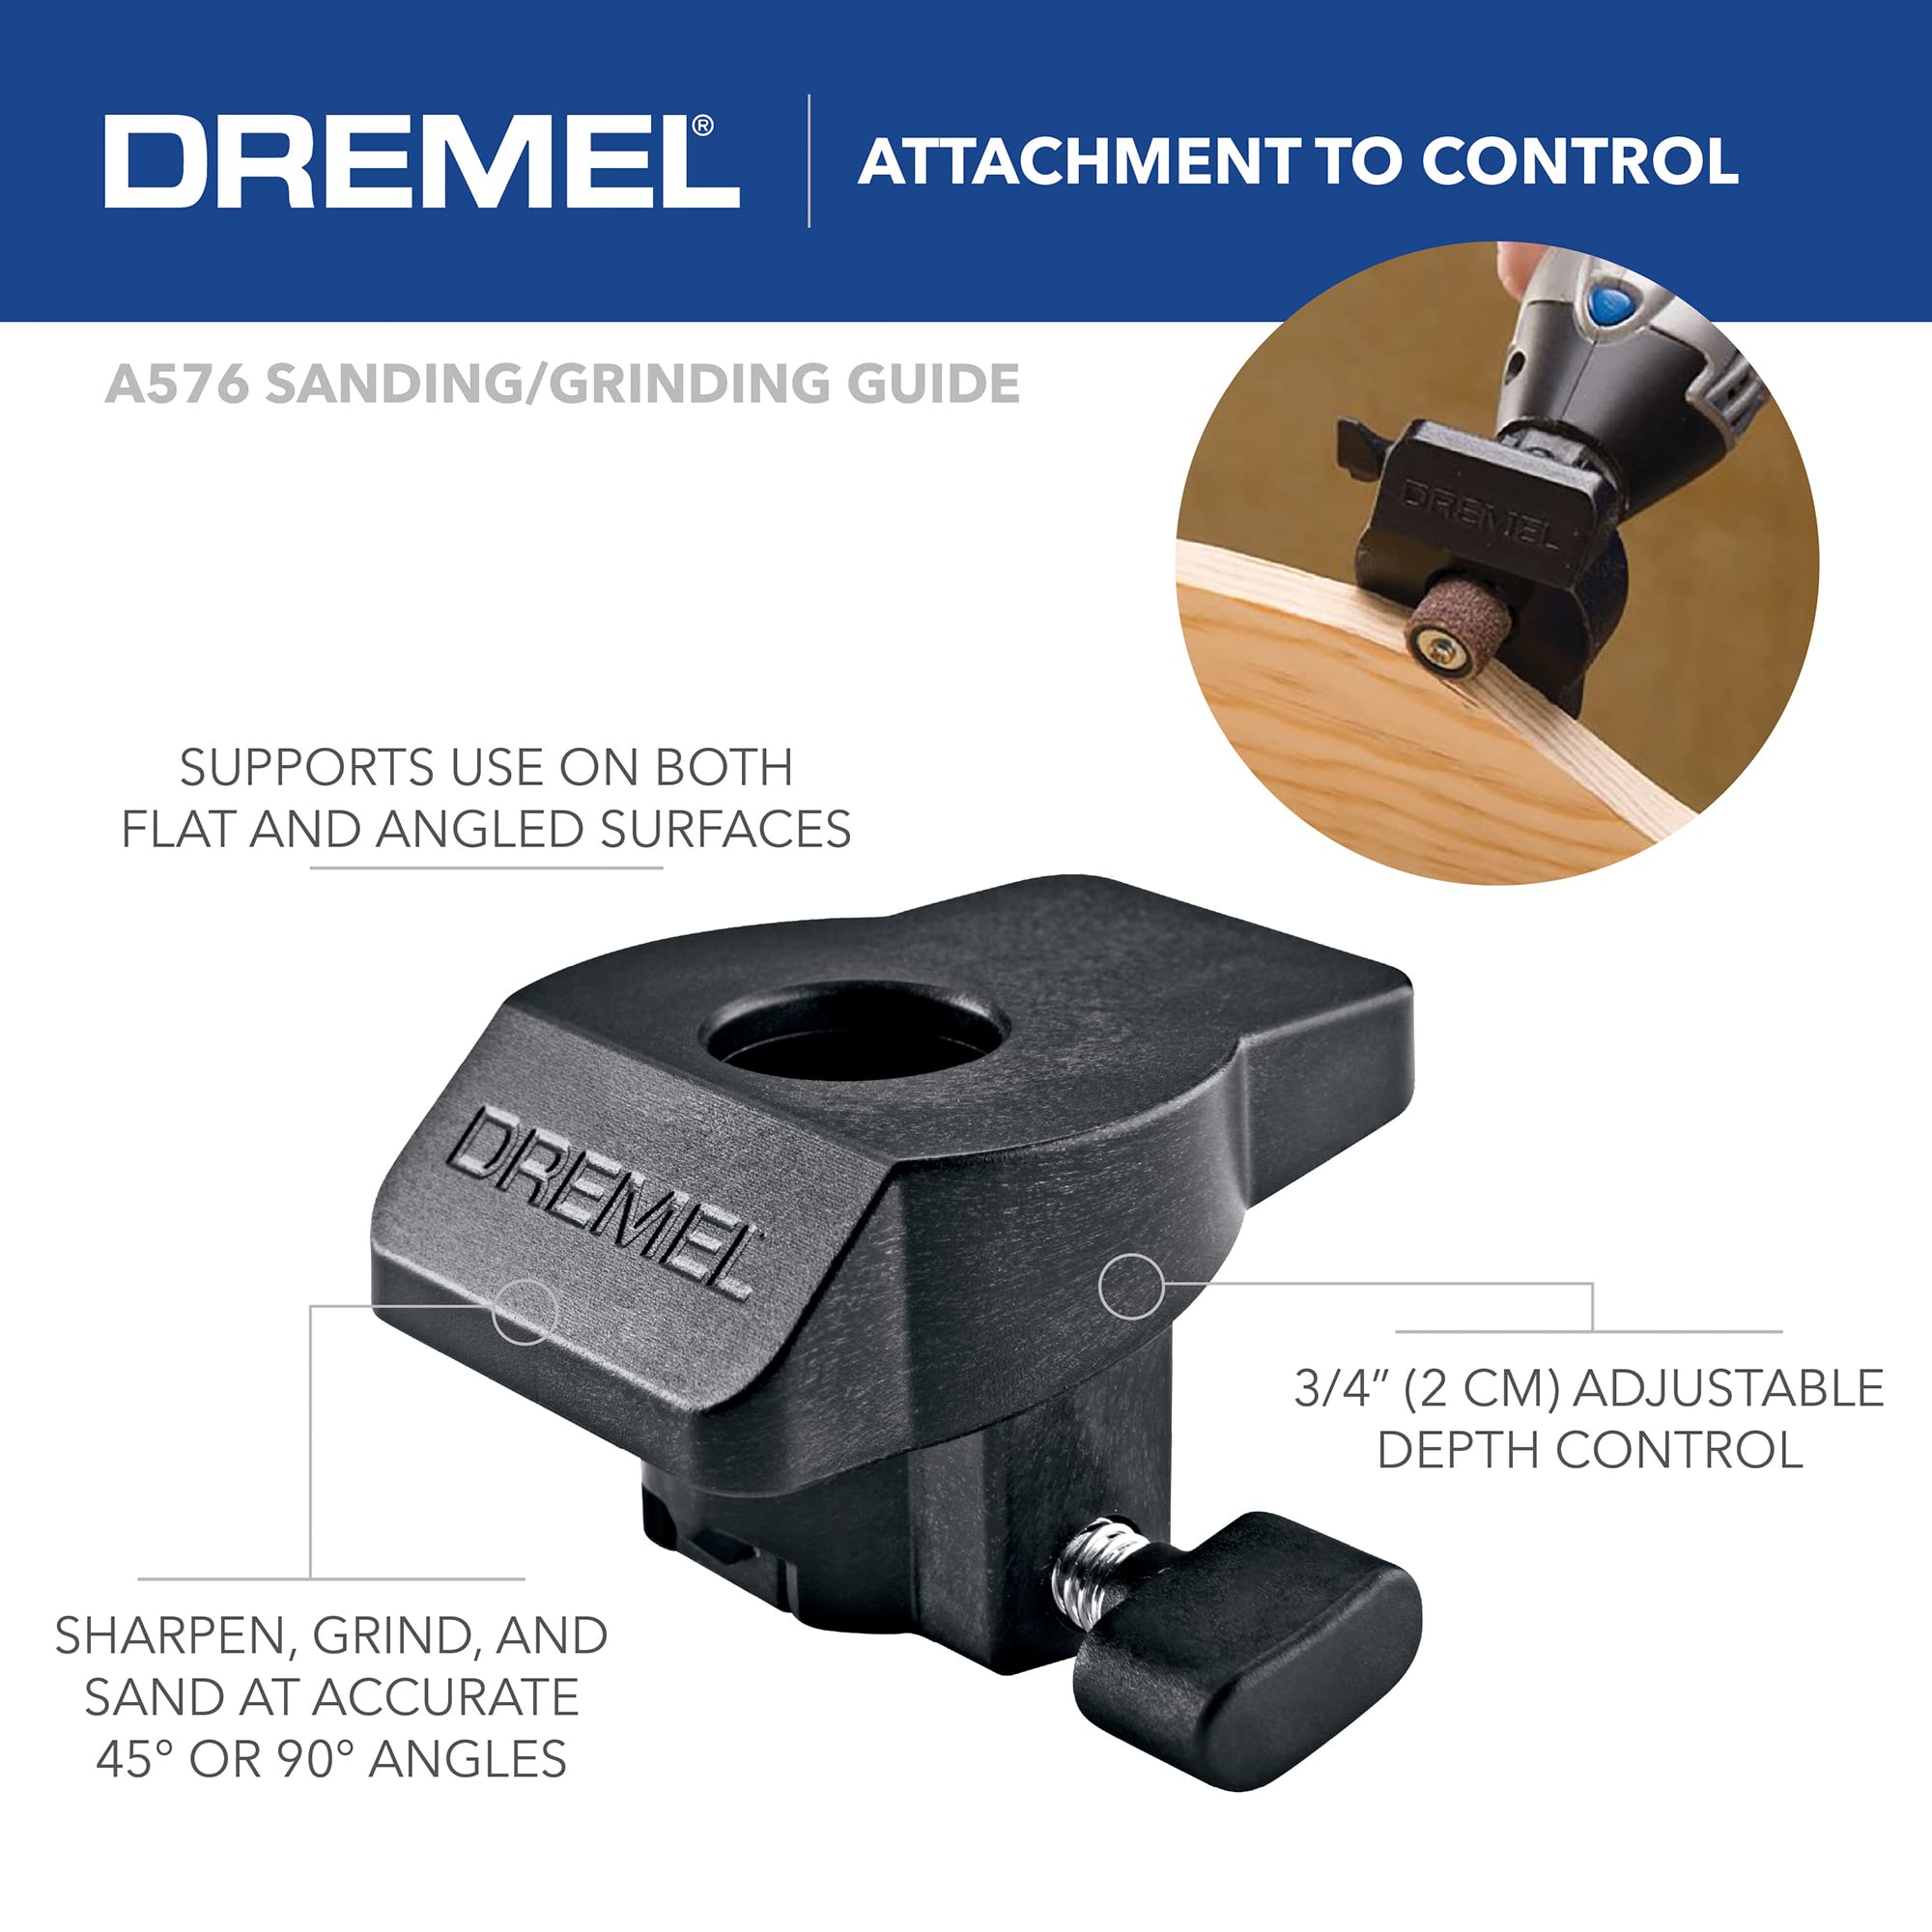 Dremel 3000-1/24 Variable Speed Rotary Tool Kit 1 Attachment & 24 Accessories, Ideal Variety Crafting and DIY Projects Cutting, Sanding, Grinding, Polishing, Drilling, Engraving (Renewed), 25 Piece